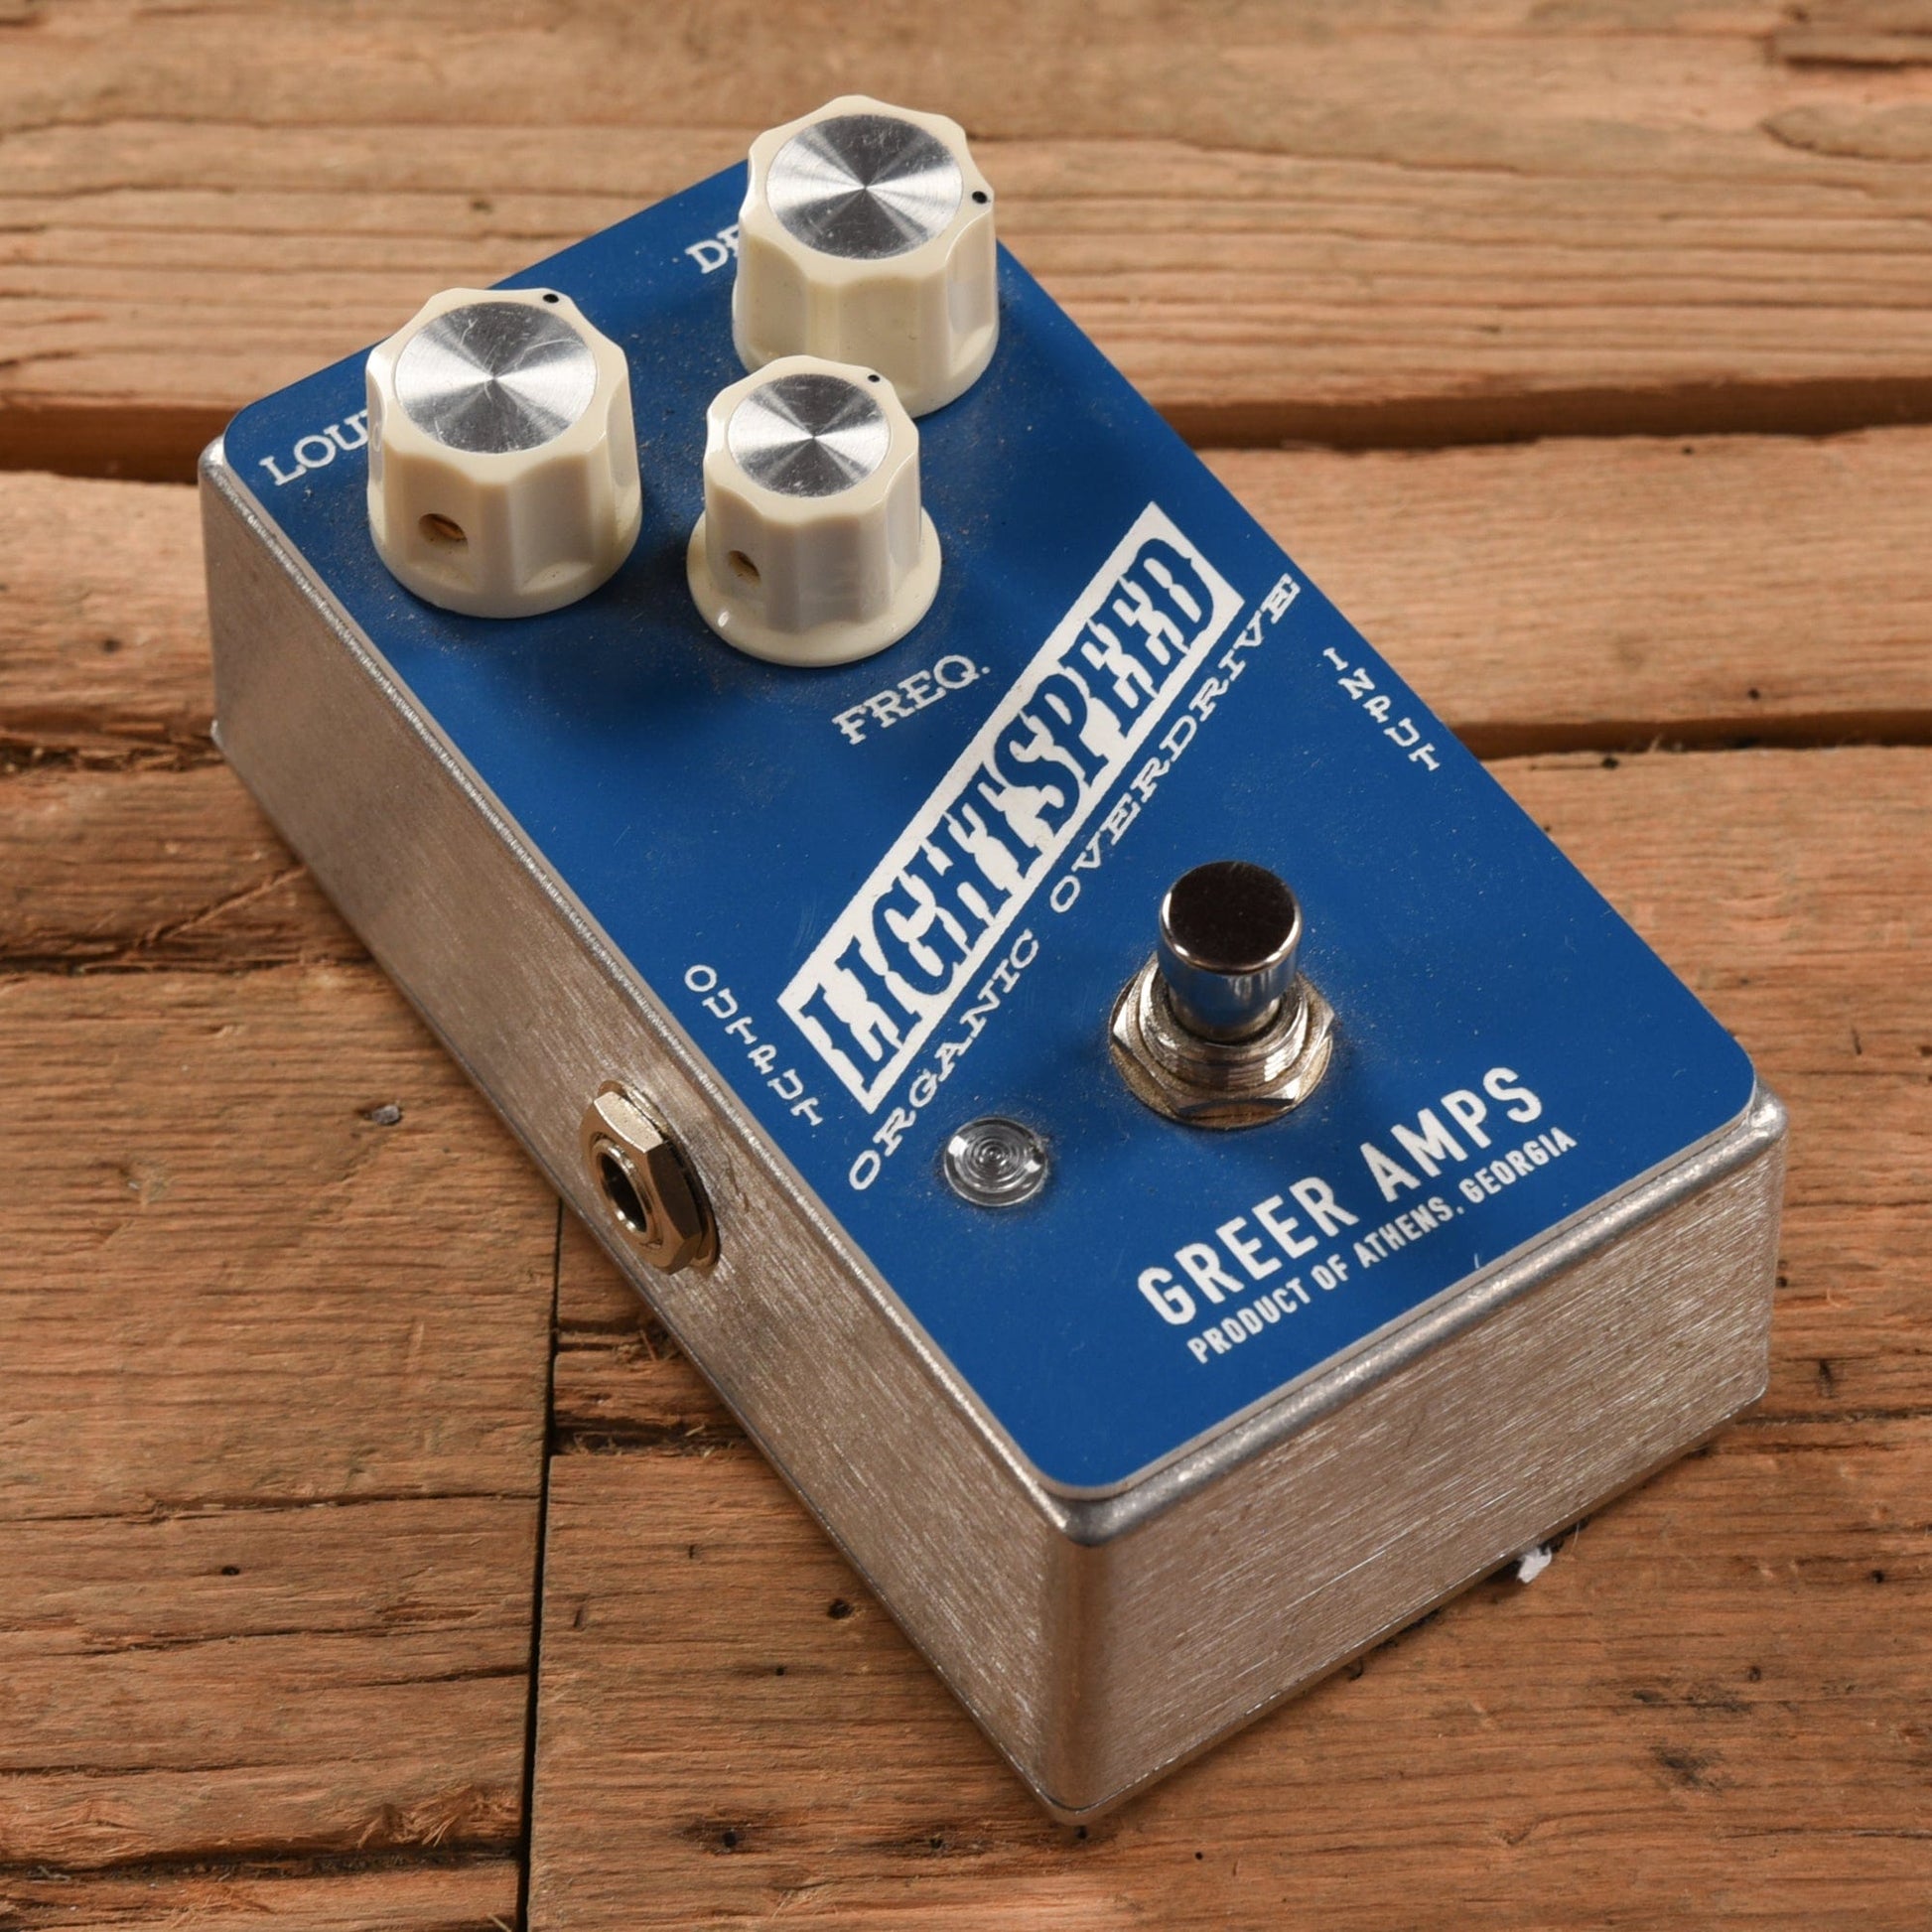 Greer Amps Lifghtspeed Effects and Pedals / Overdrive and Boost